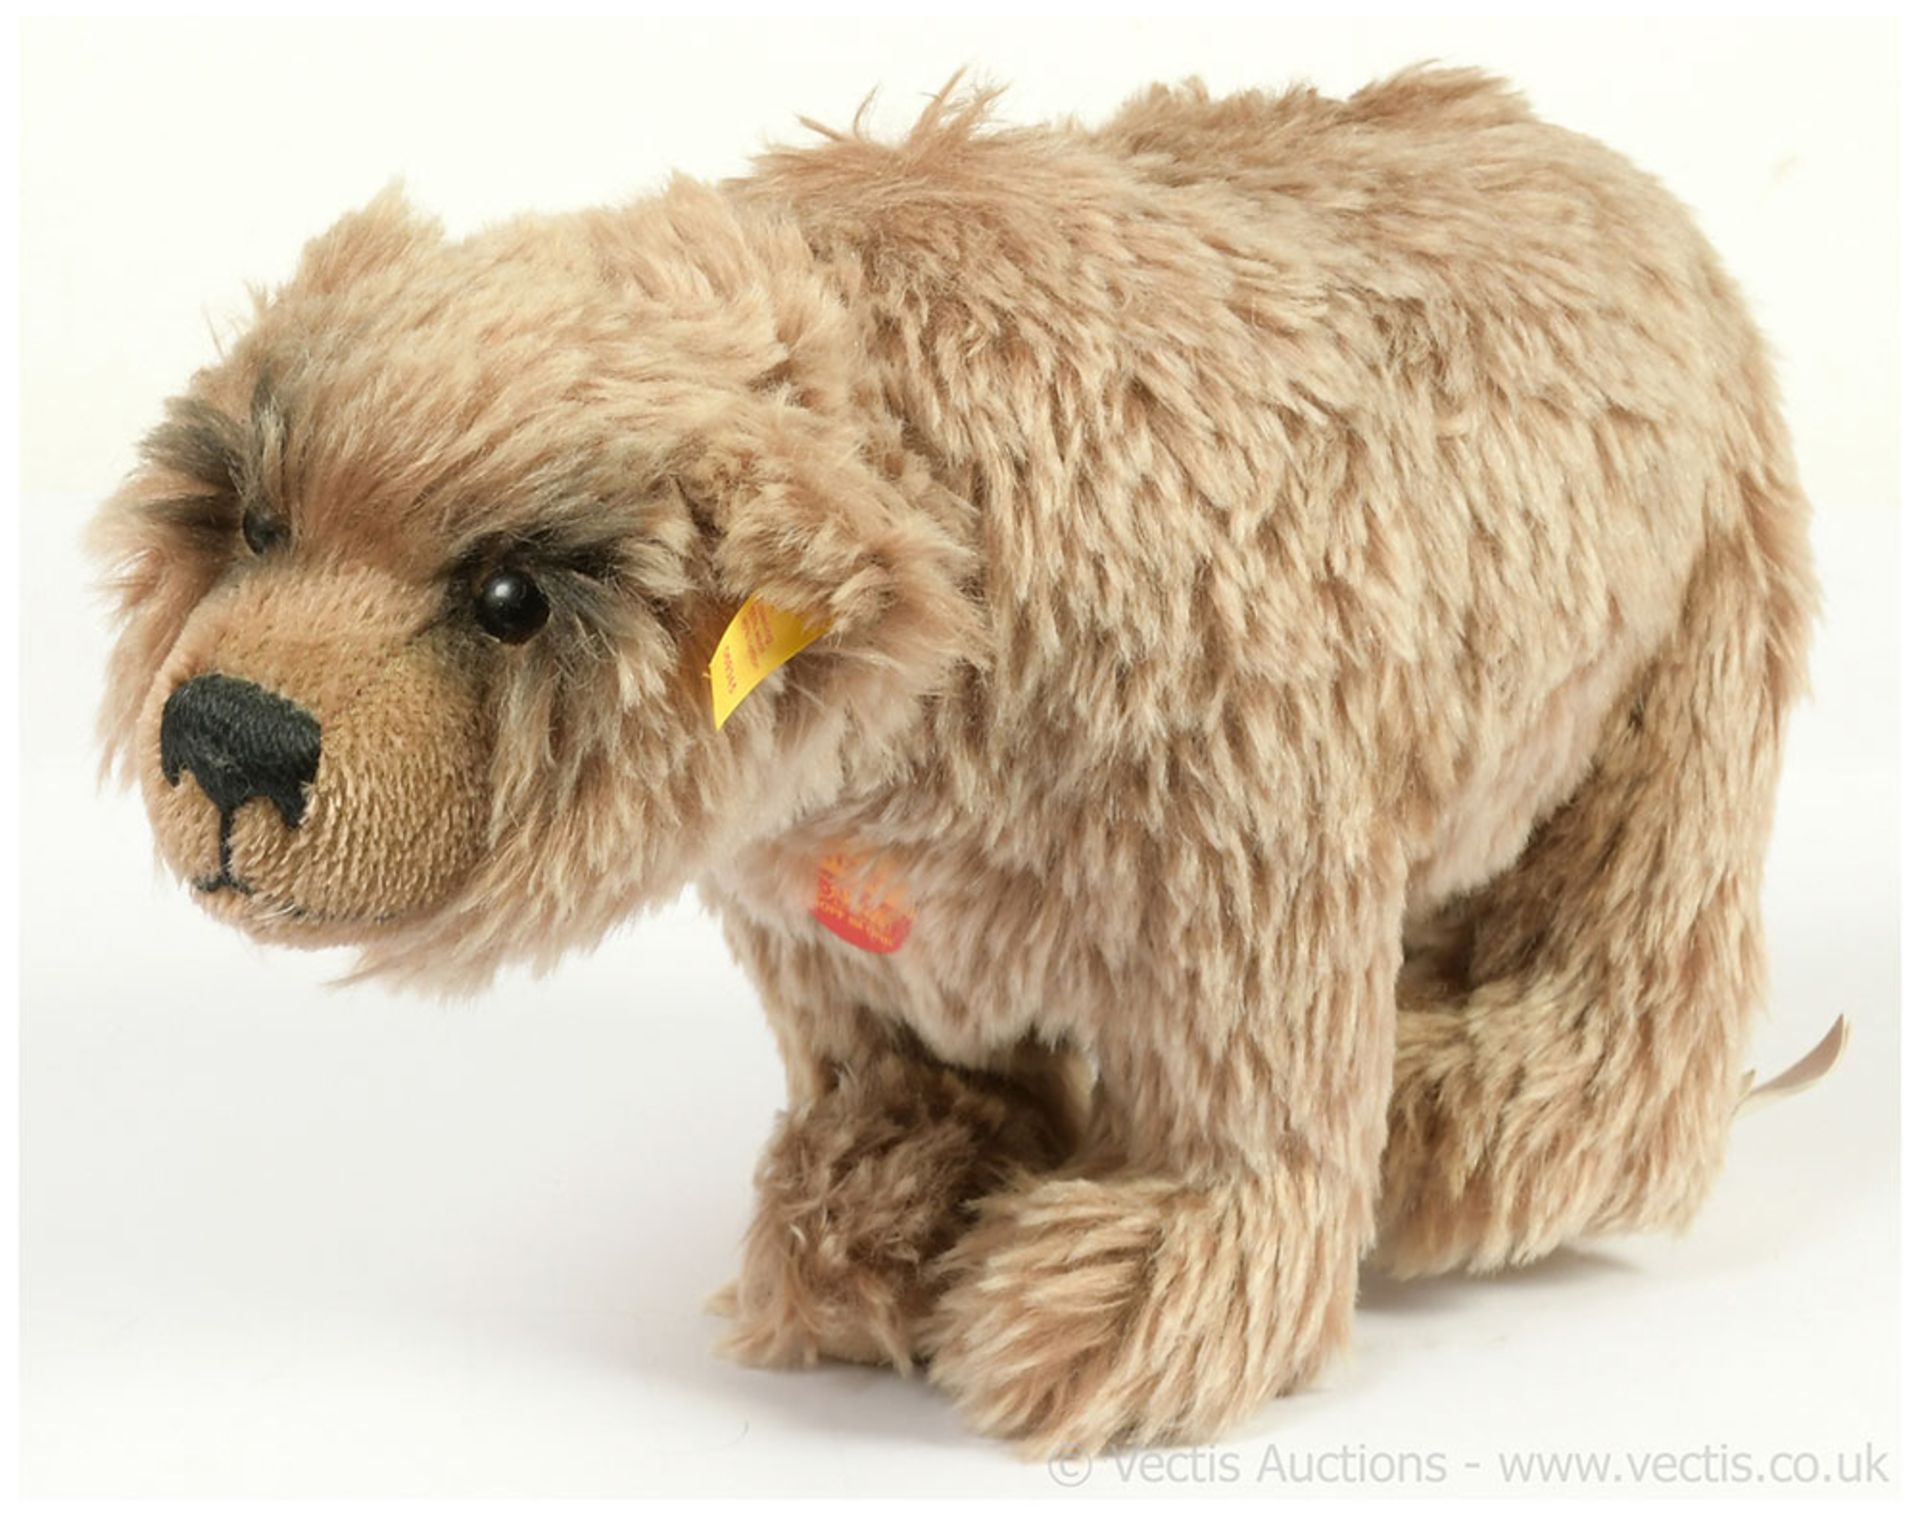 Steiff Grizzly bear, yellow tag 069345, brown